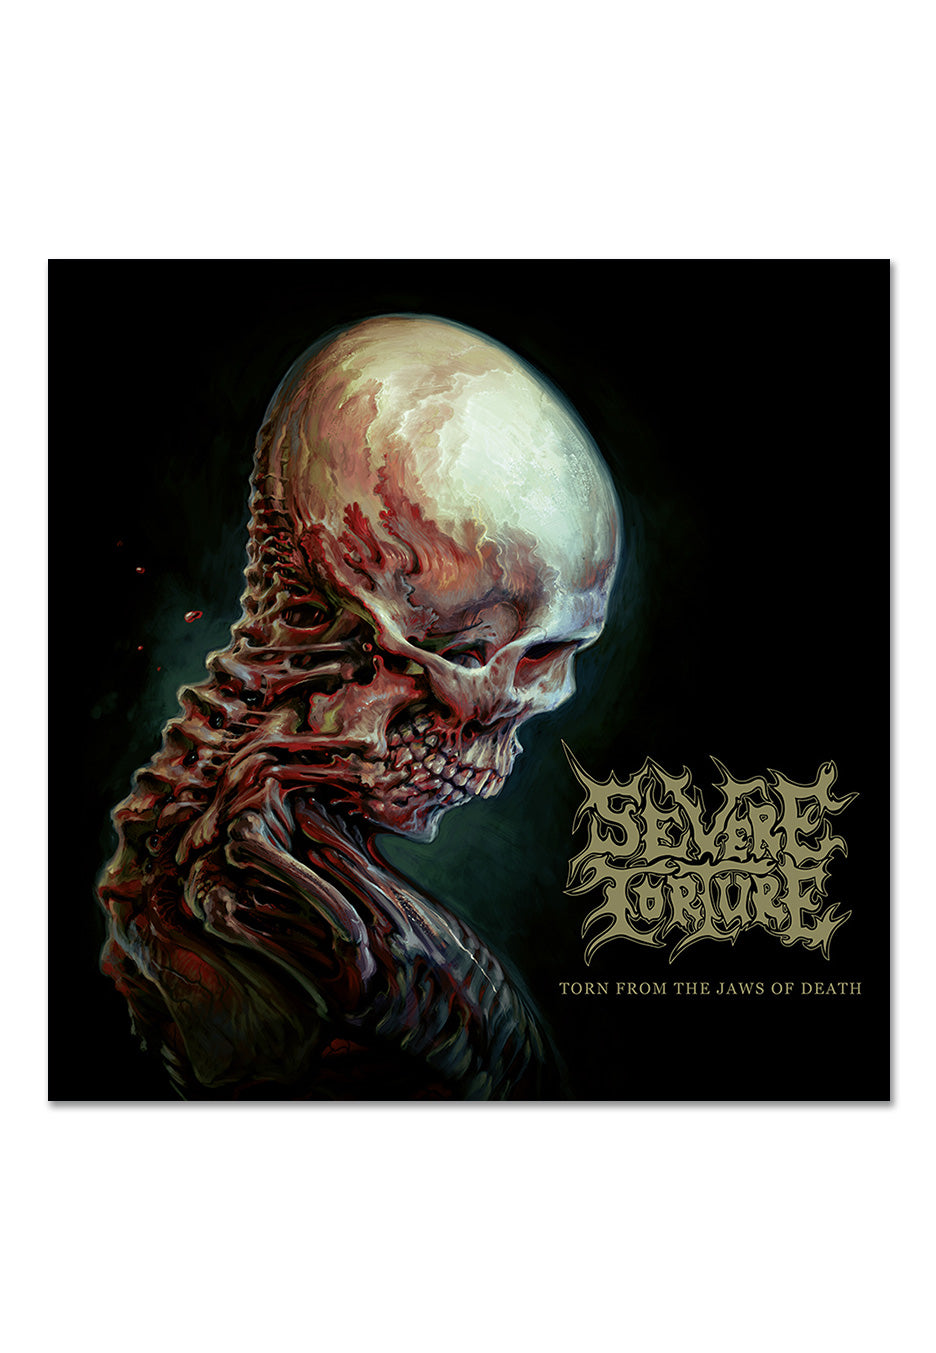 Severe Torture - Torn From The Jaws Of Death - Digipak CD